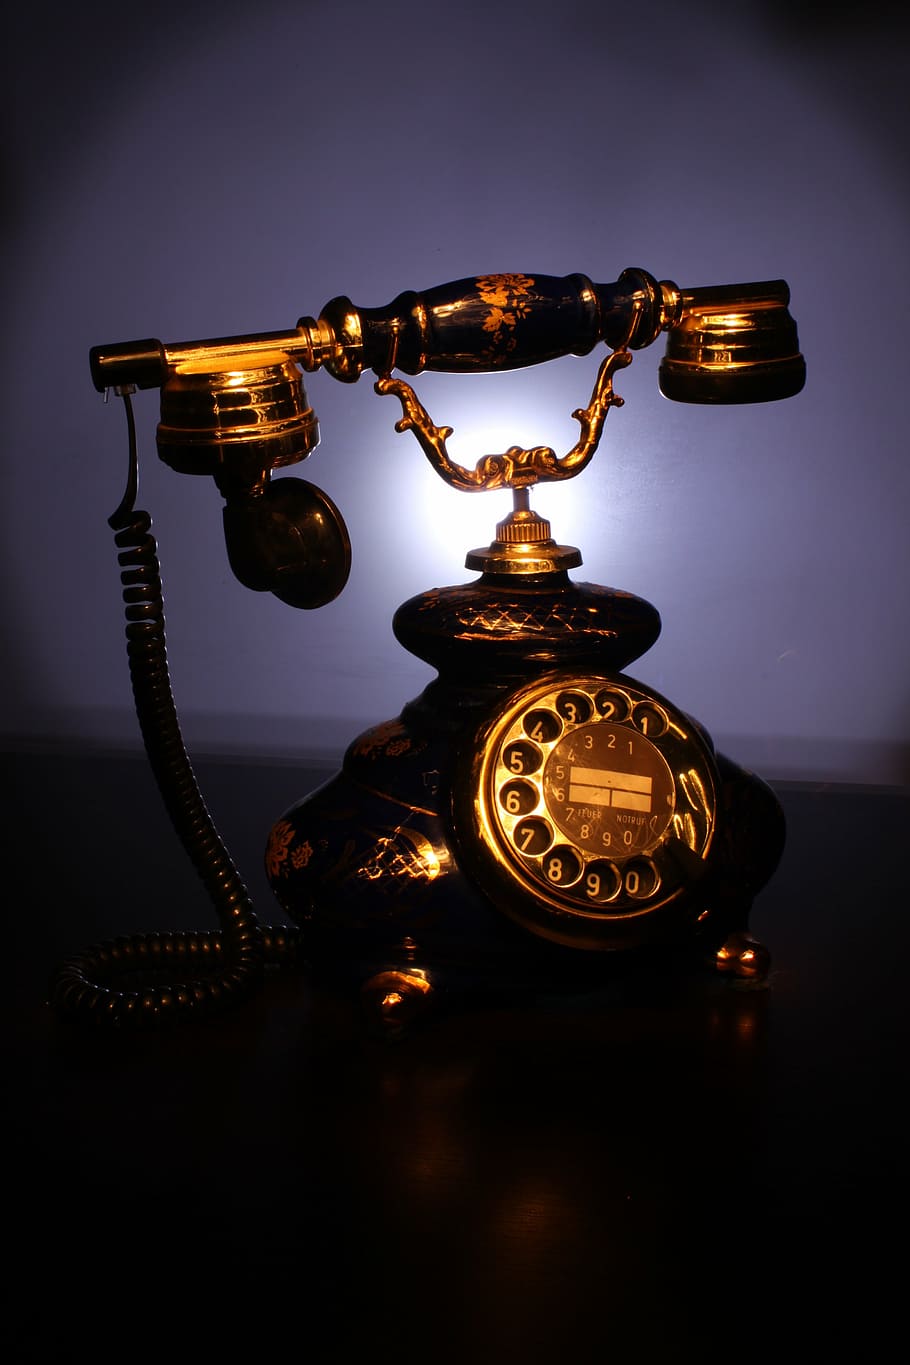 light coloring, phone, handset, light, light painting, telephone, antique, retro styled, indoors, technology